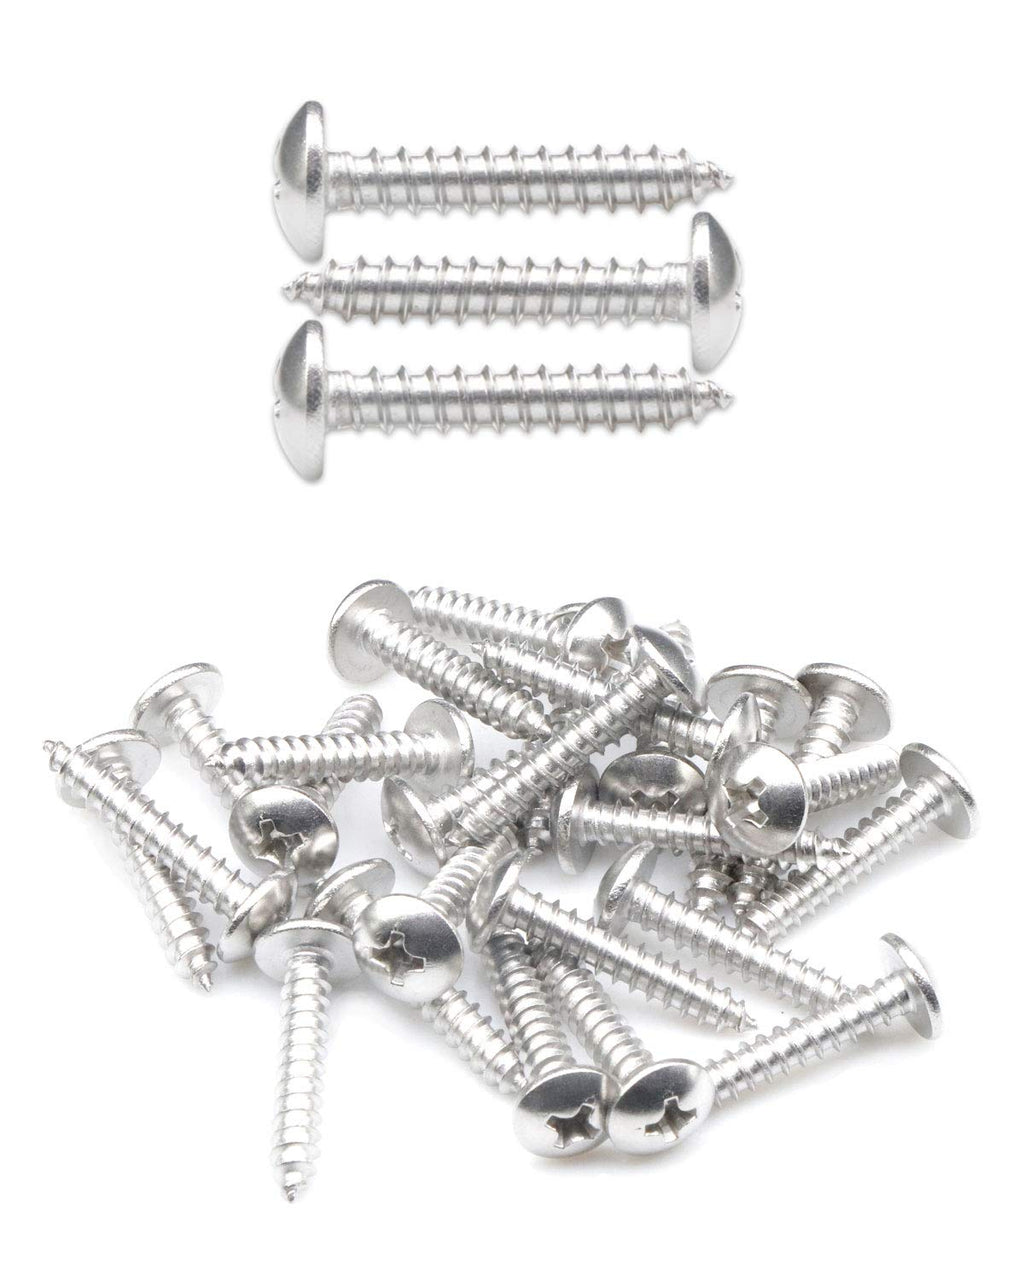 100Pcs #6 x 3/4" Truss Head Phillips Wood Screws Stainless Steel 304 Self Tapping Screw | by IMSCREWS 100 Pcs #6x3/4" Silver